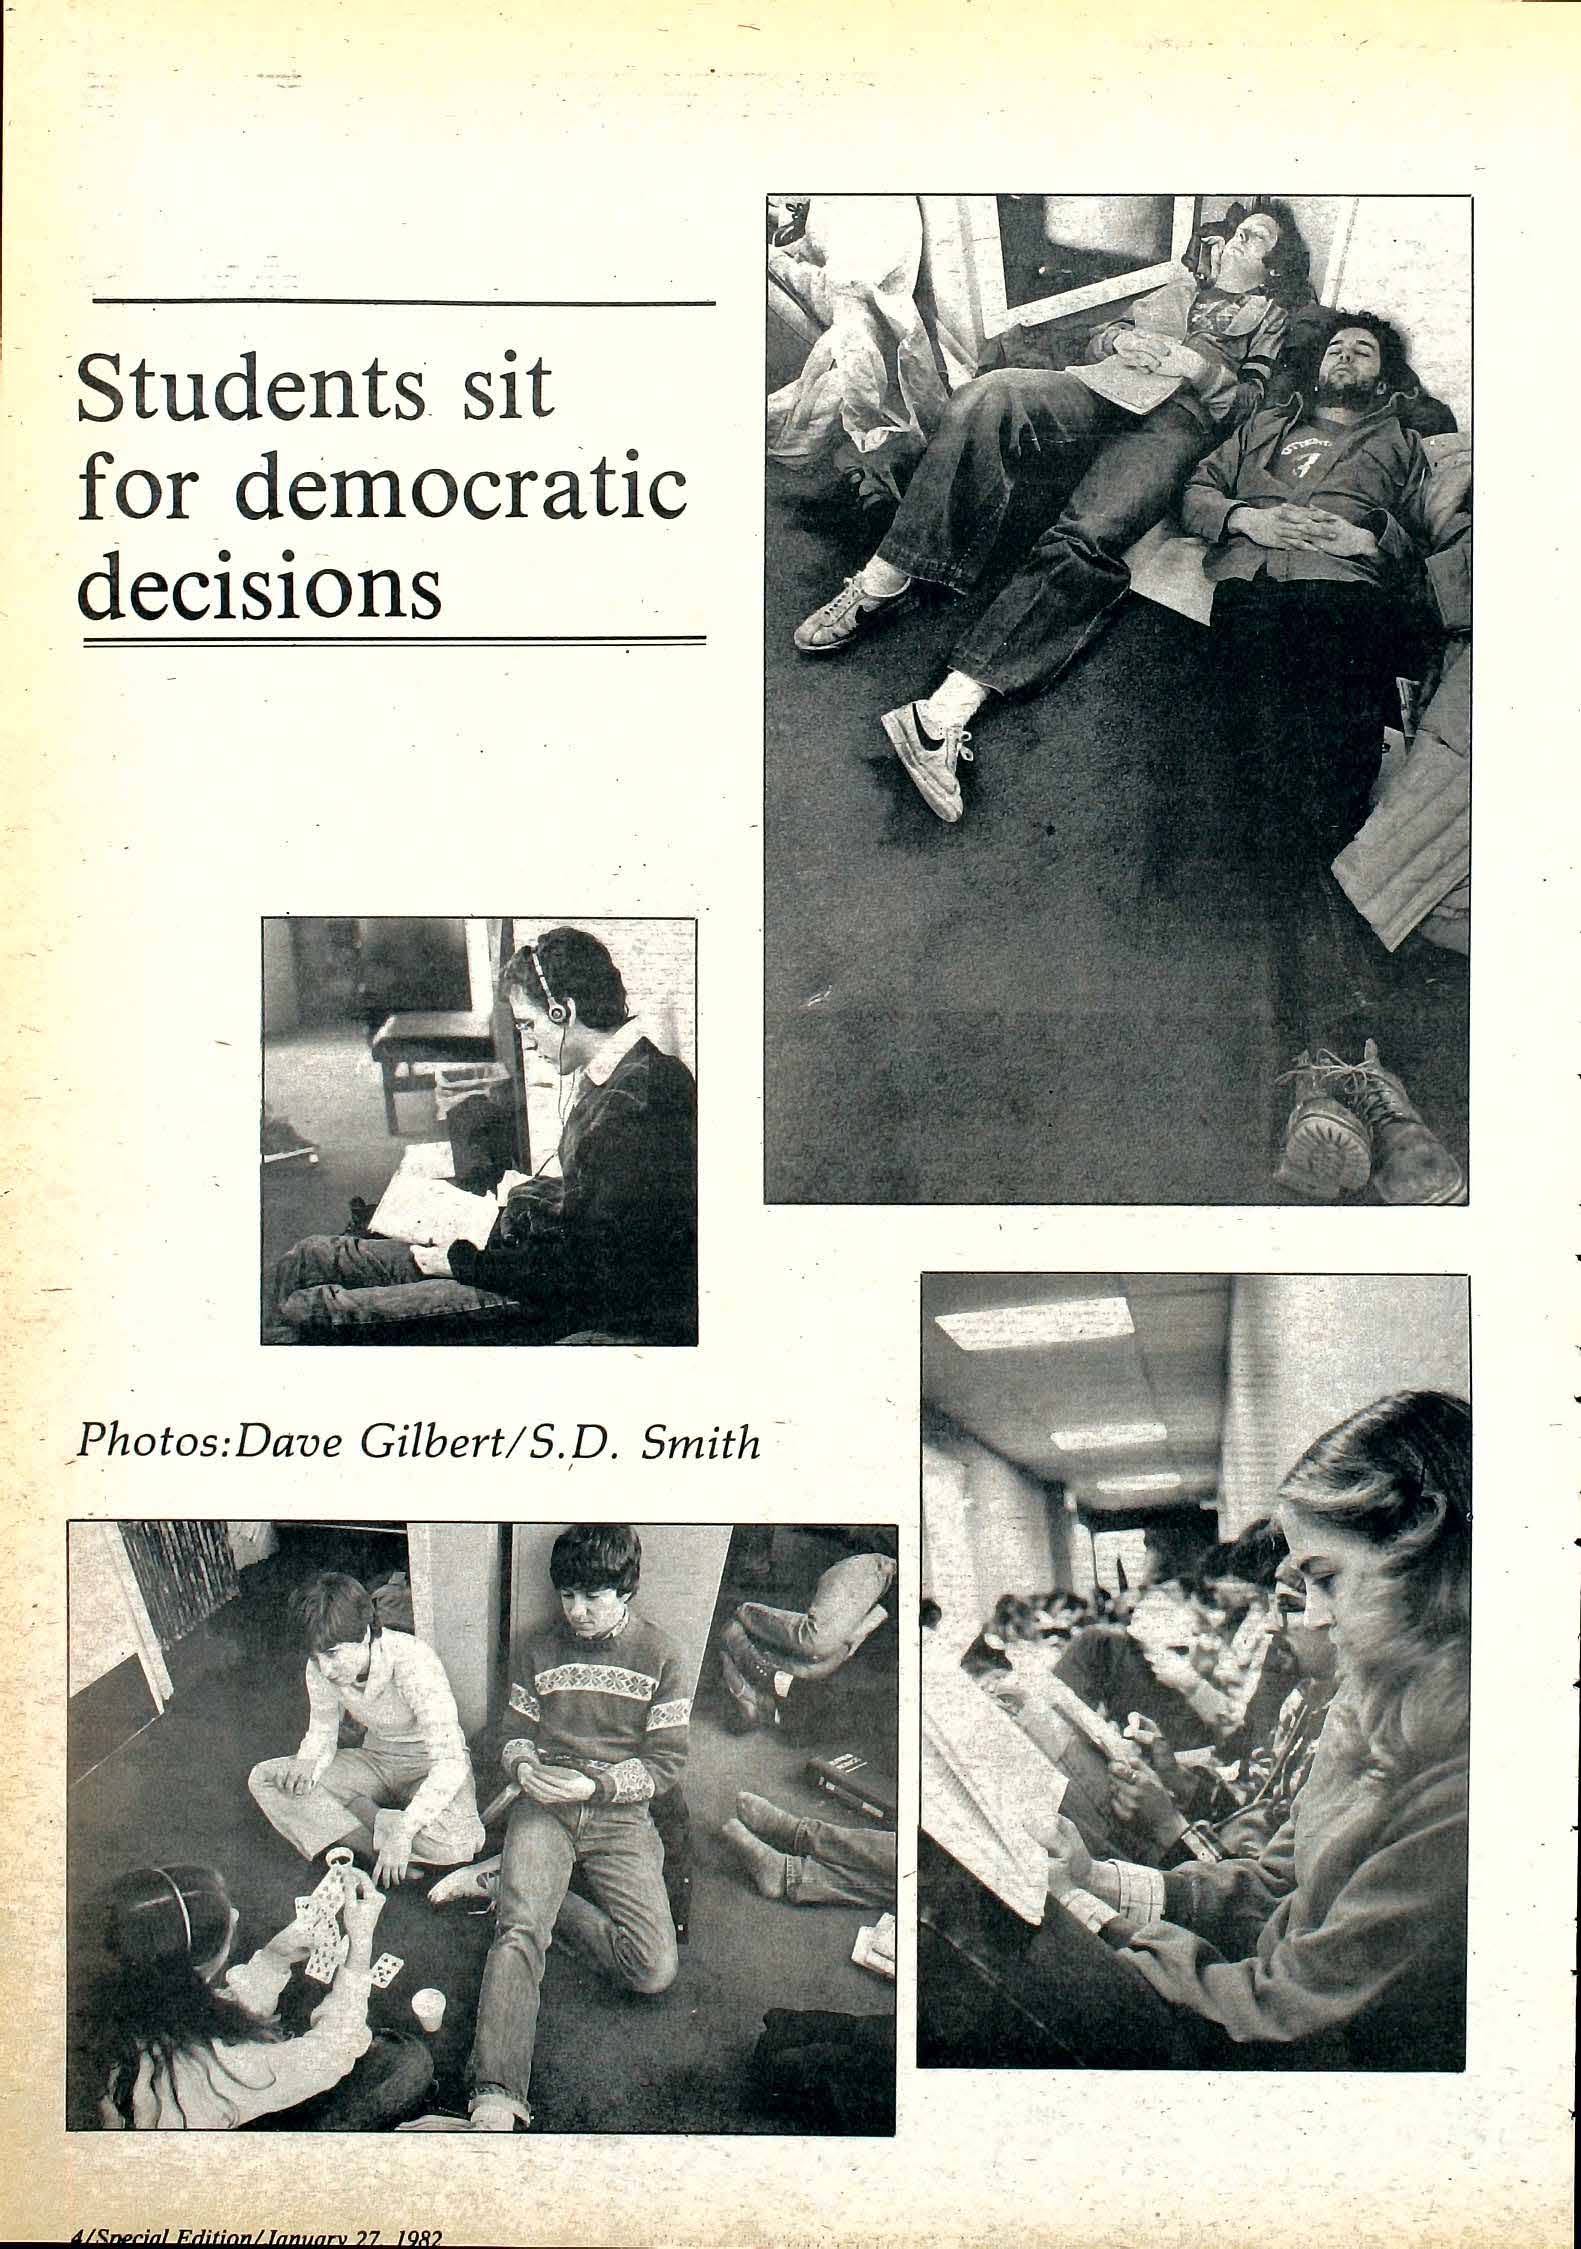 The Mac Weekly, January 27, 1982. Students Sit for Democratic Decisions.